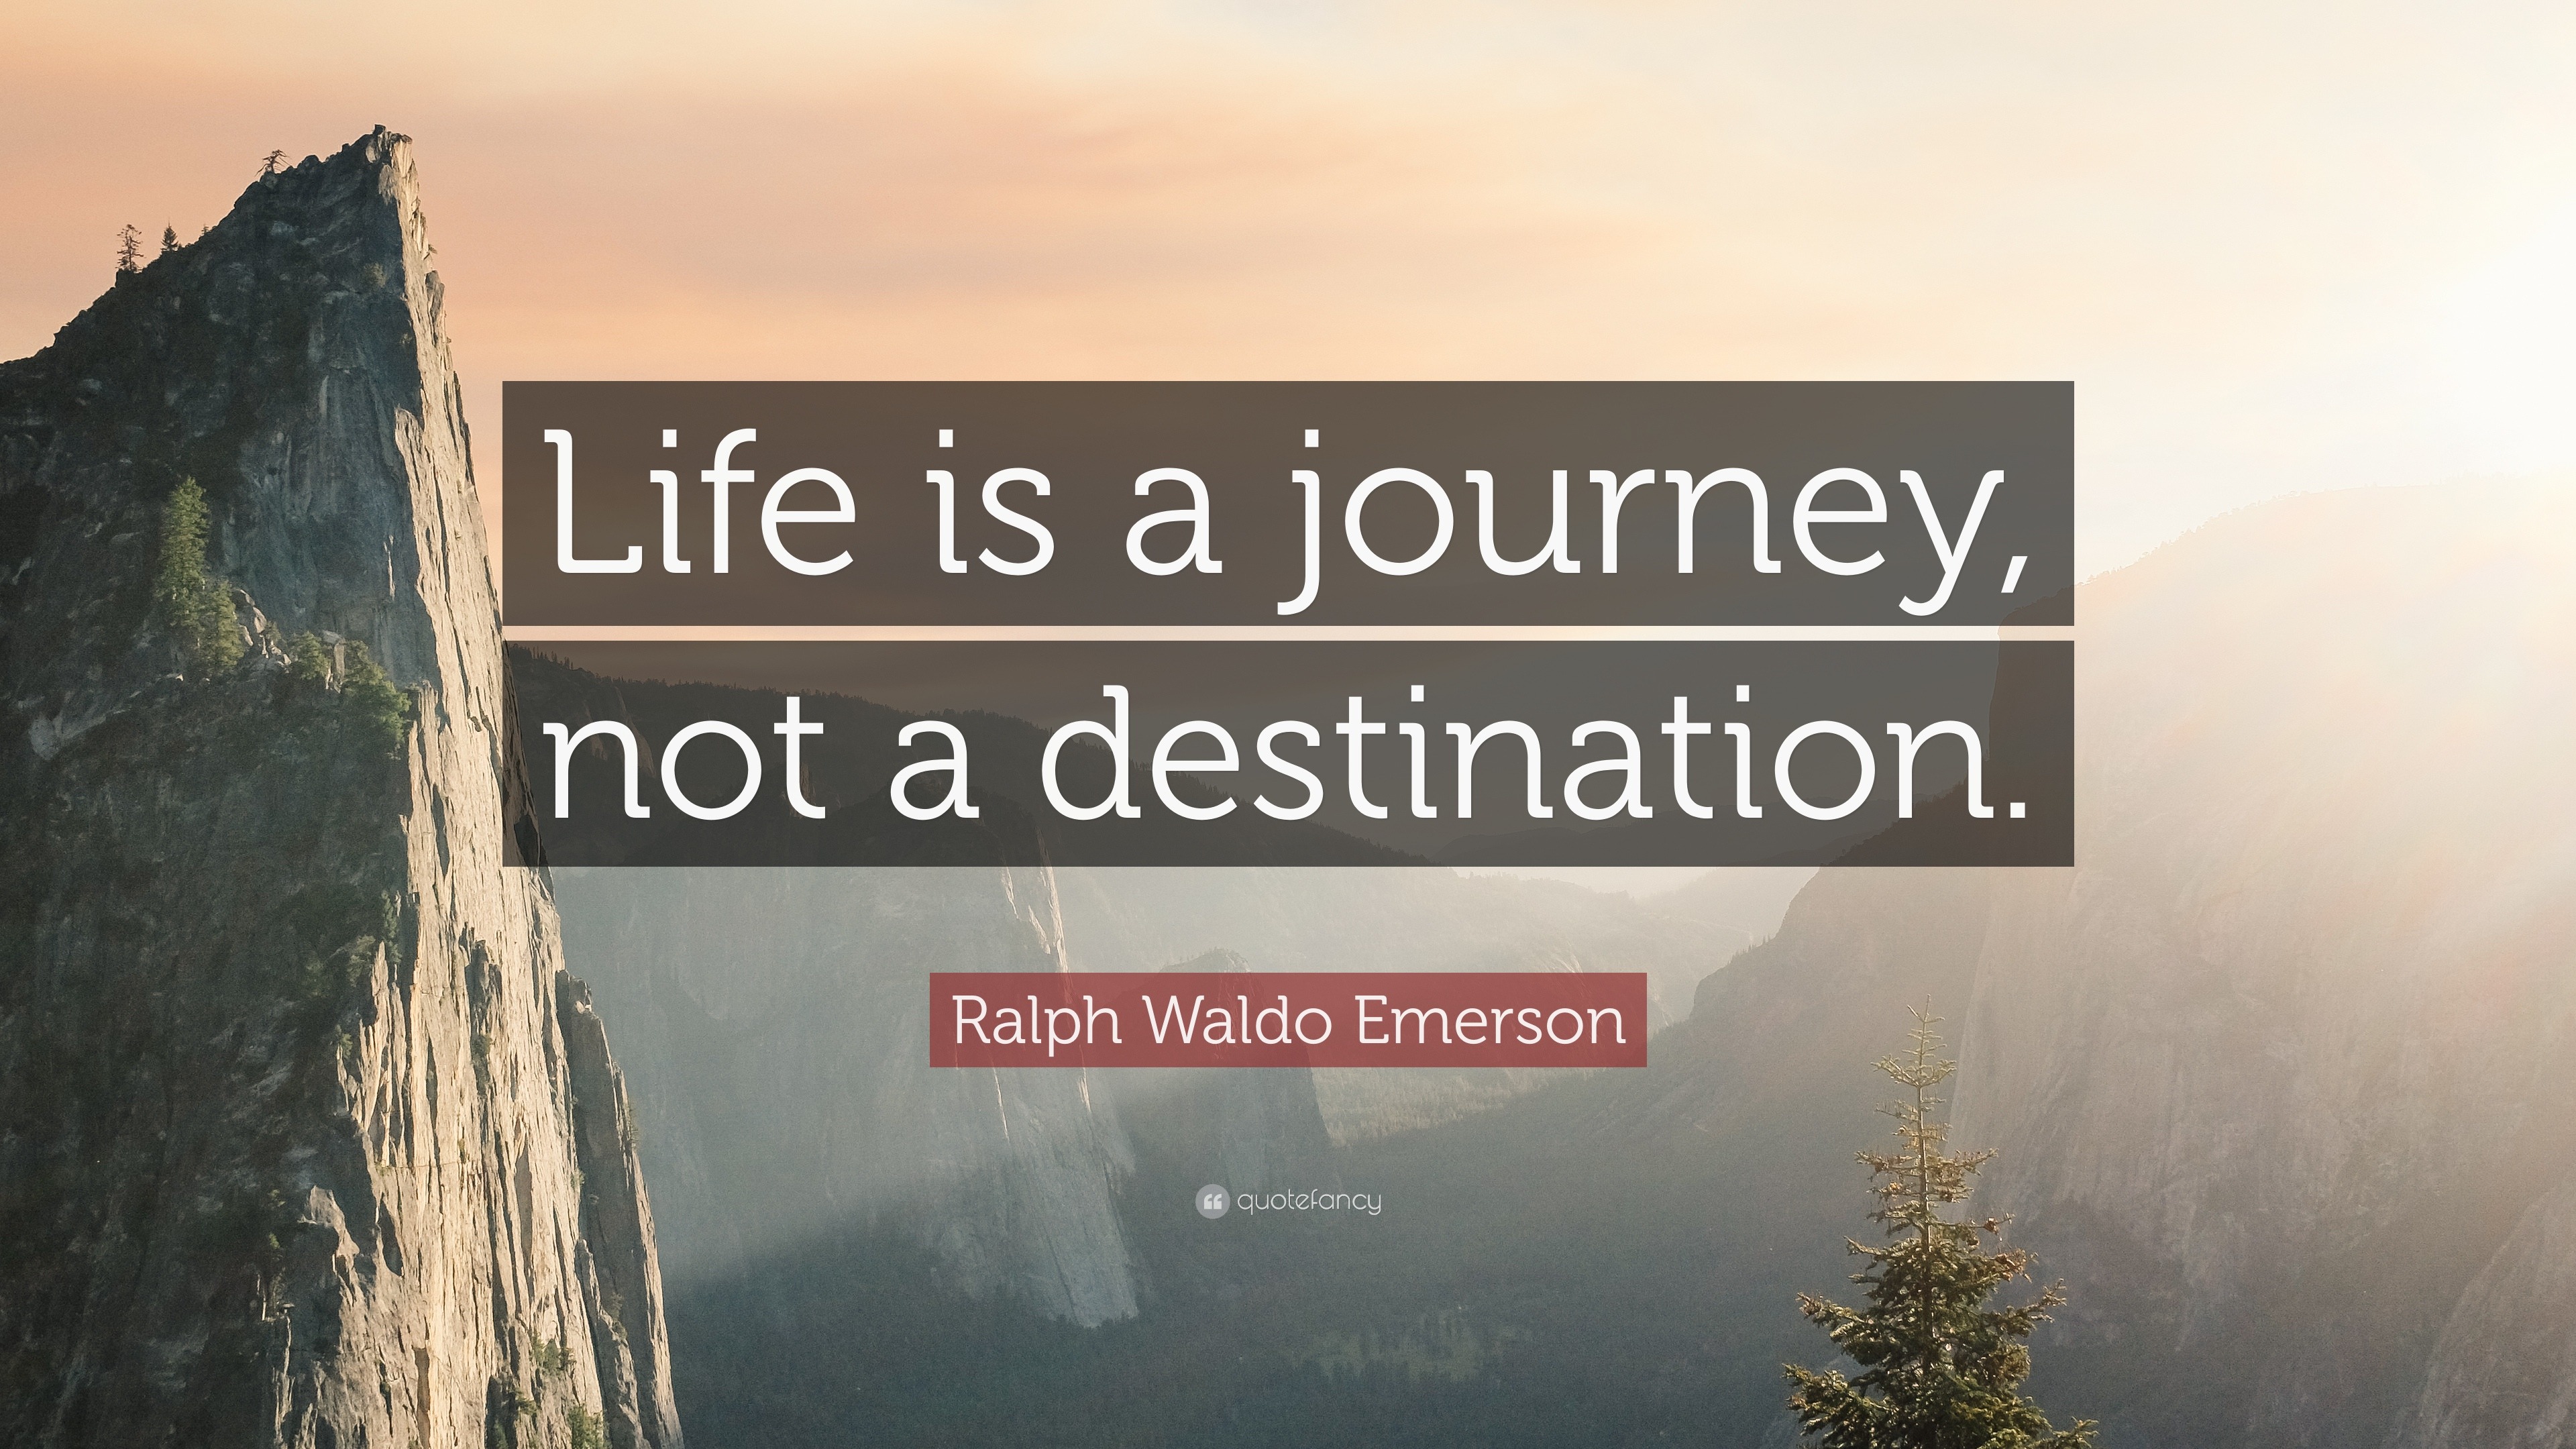 Ralph Waldo Emerson Quote “Life is a journey not a destination ”